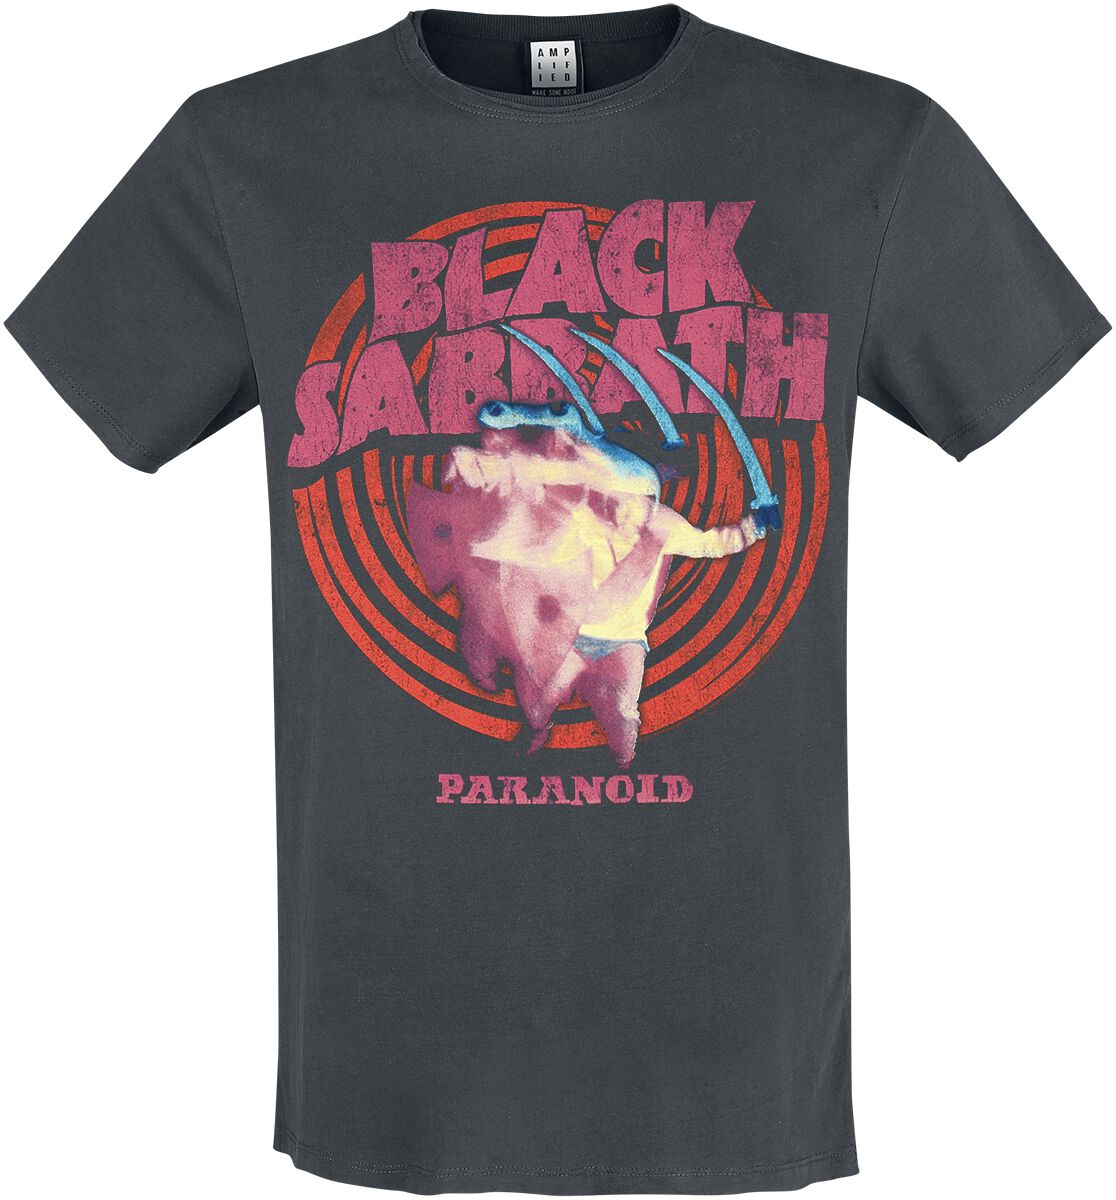 Black Sabbath Amplified Collection - Paranoid T-Shirt charcoal in XXL